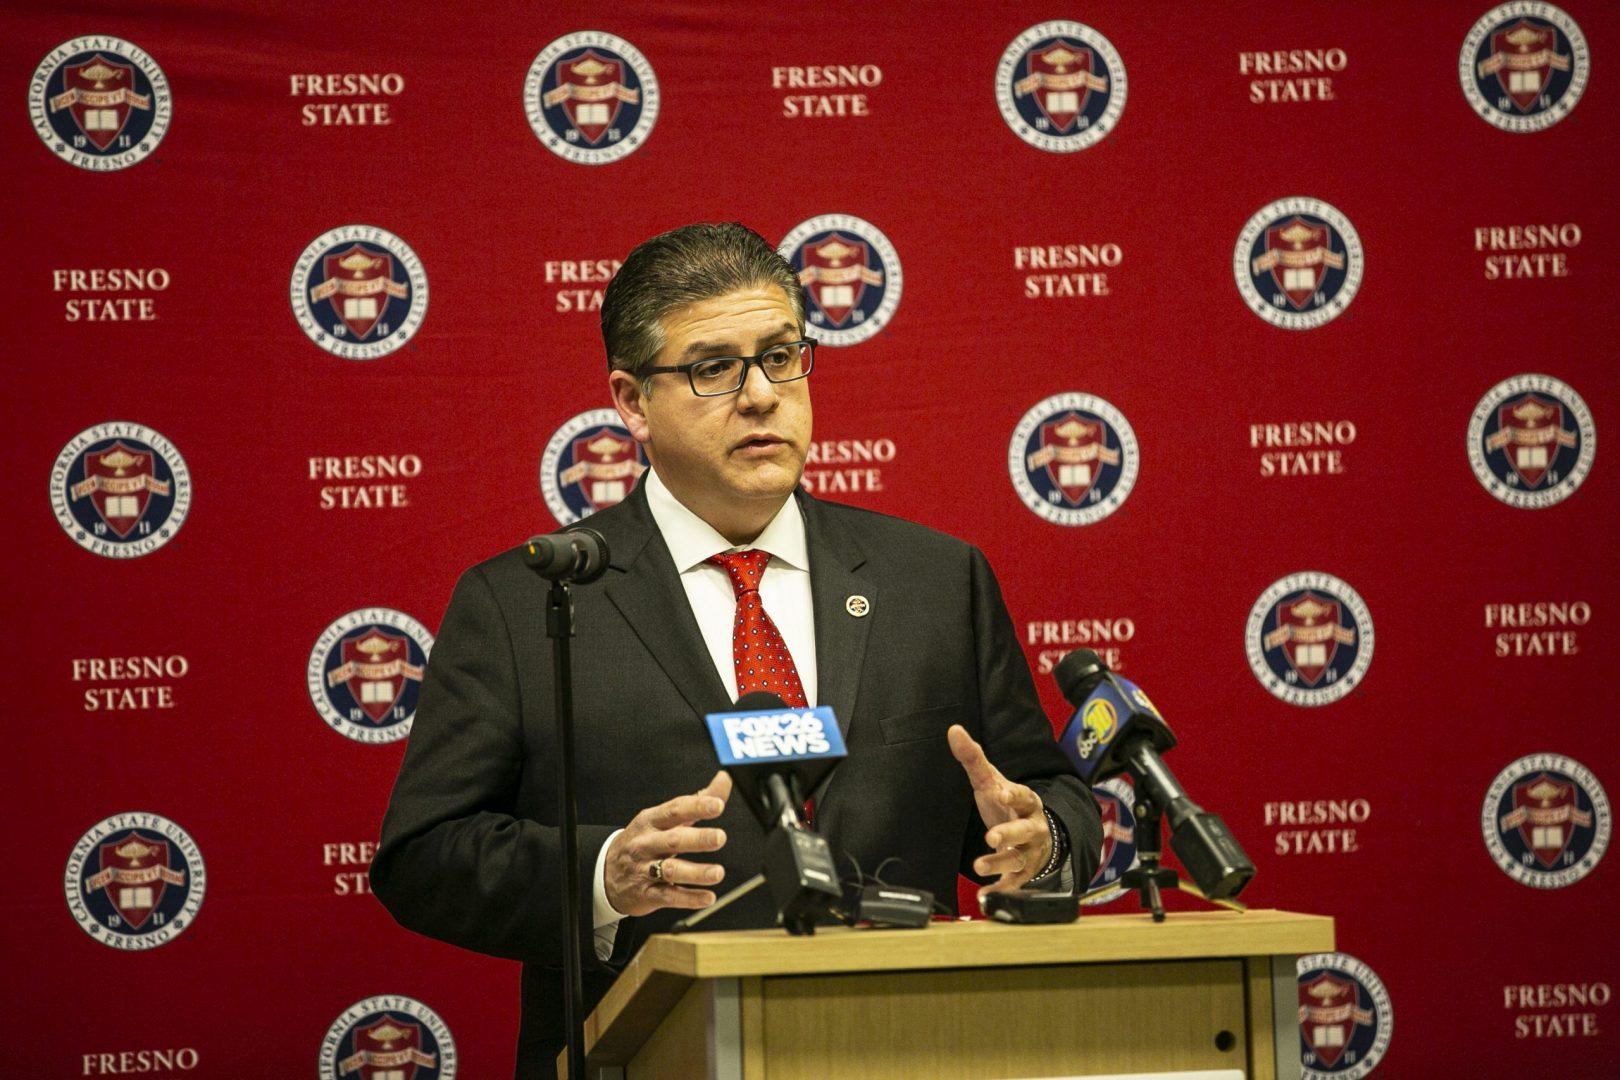 Fresno State President Dr. Joseph Castro speaking at a press conference on March 12, 2020. (Larry Valenzuela/The Collegian)